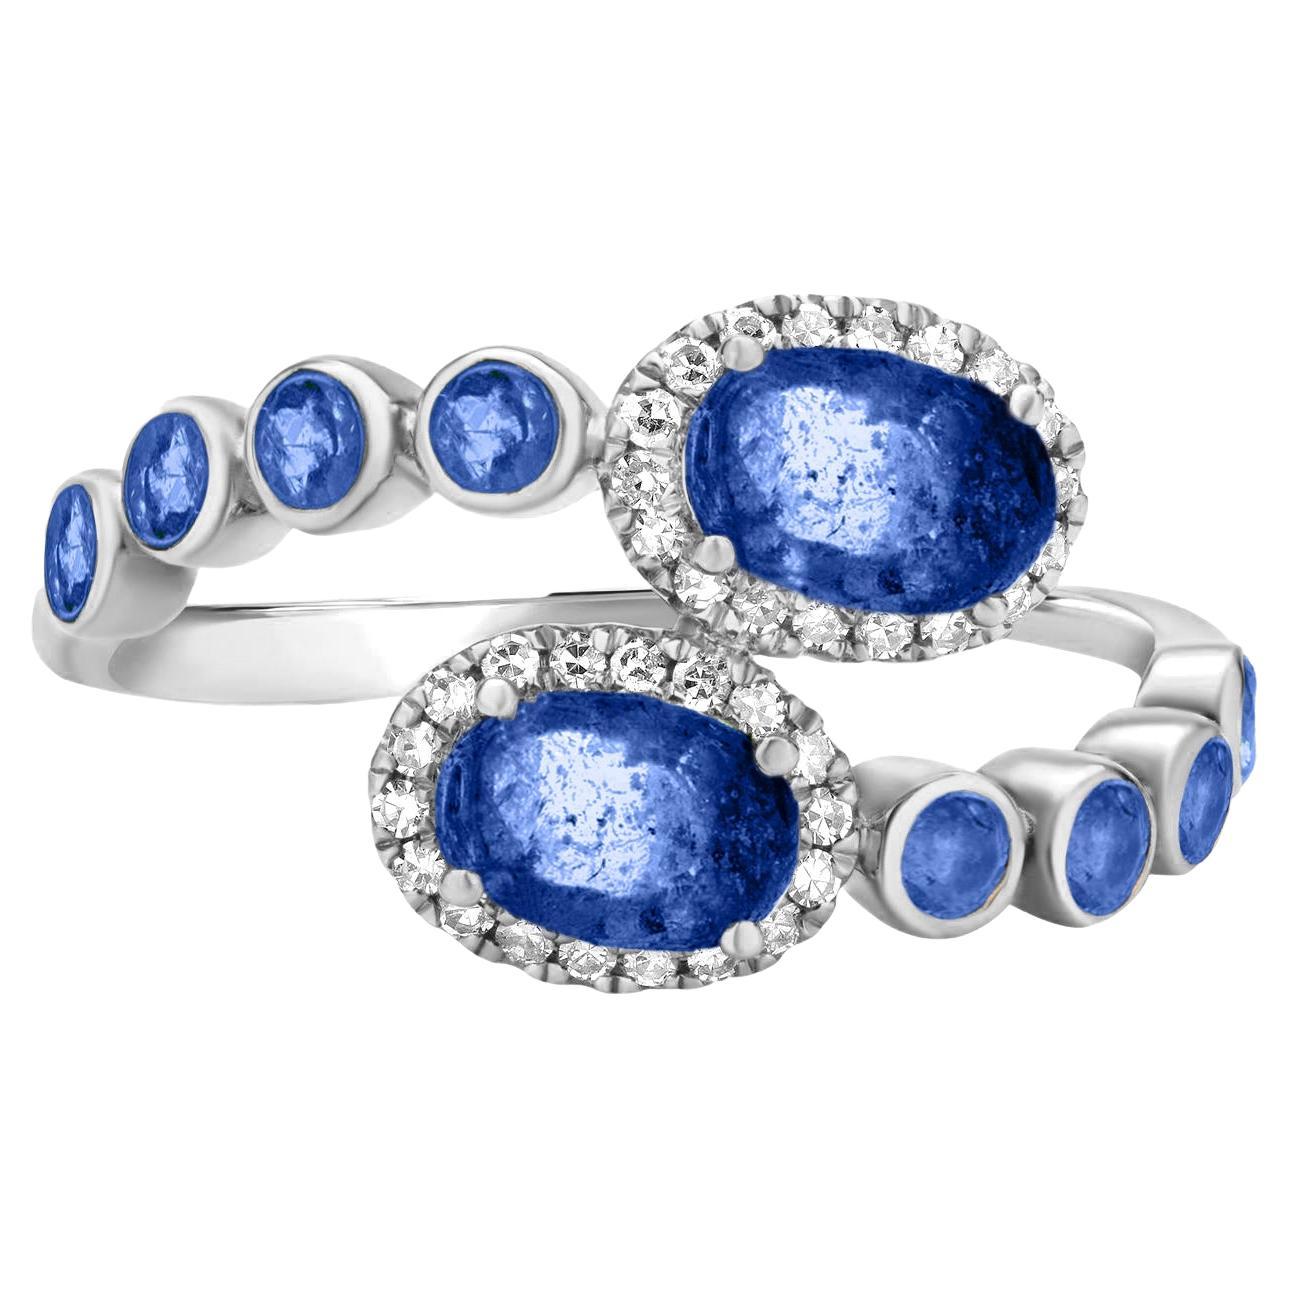 Gemistry 1.87 Cttw. Diamond and Blue Sapphire Swirl Ring in 18k White Gold For Sale